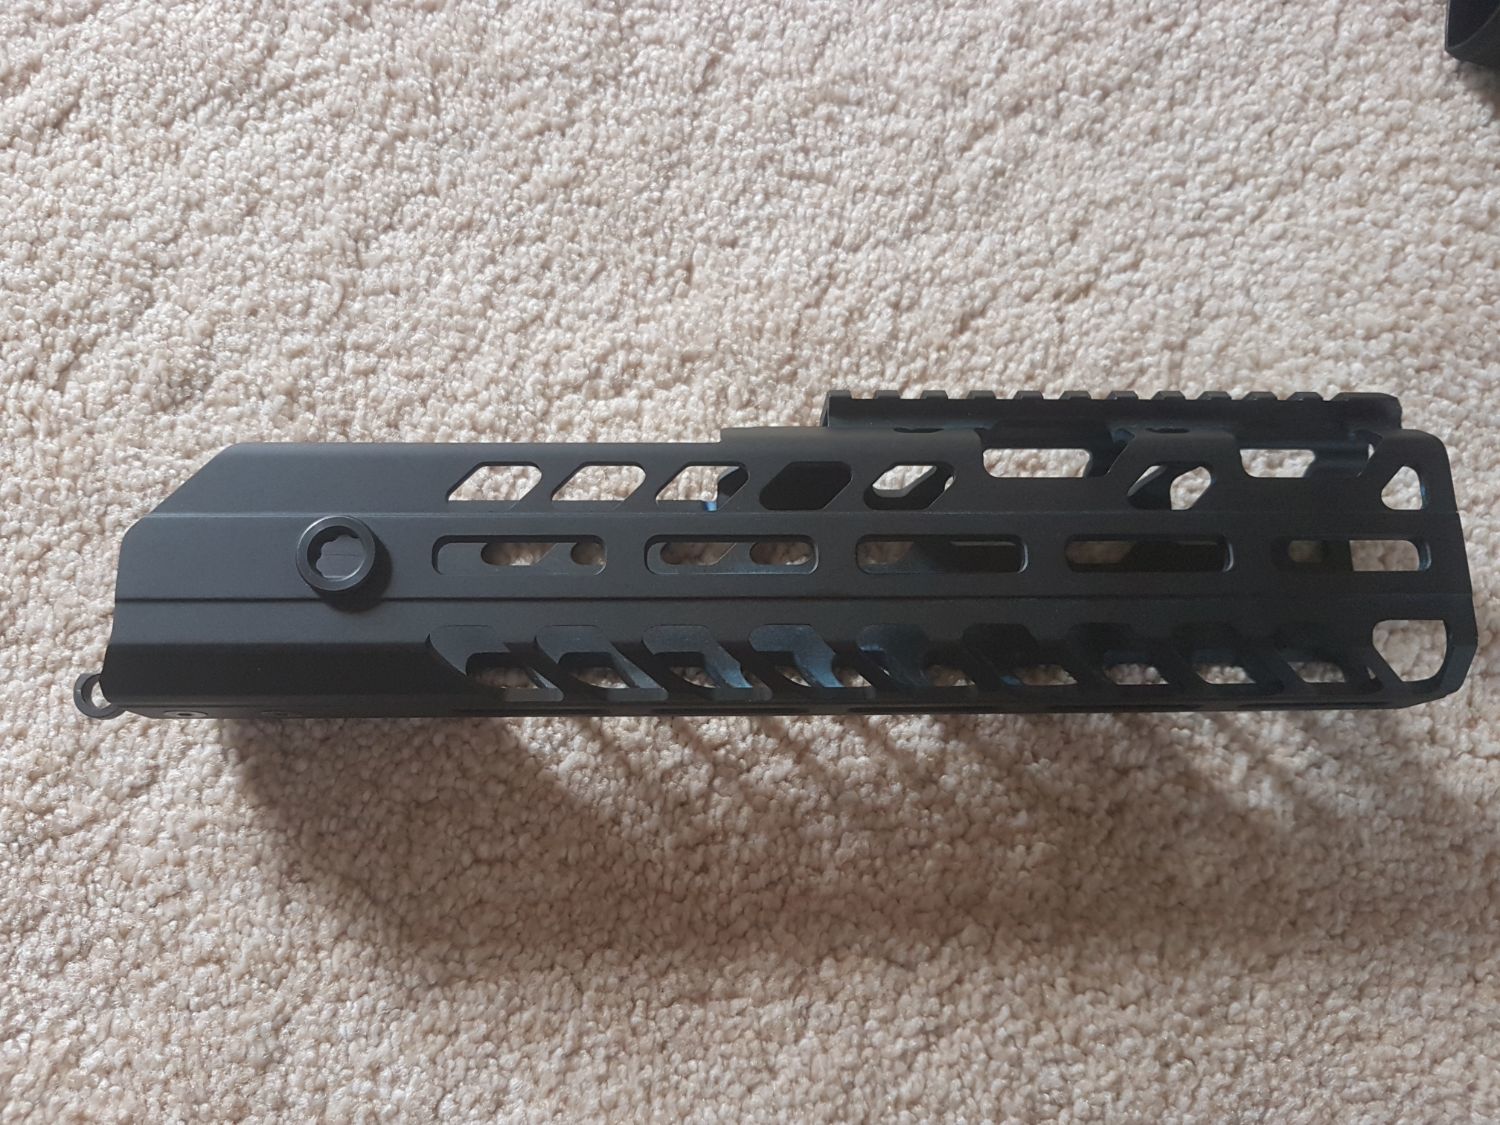 Sig MCX parts - prices reduced - Parts - Airsoft Forums UK